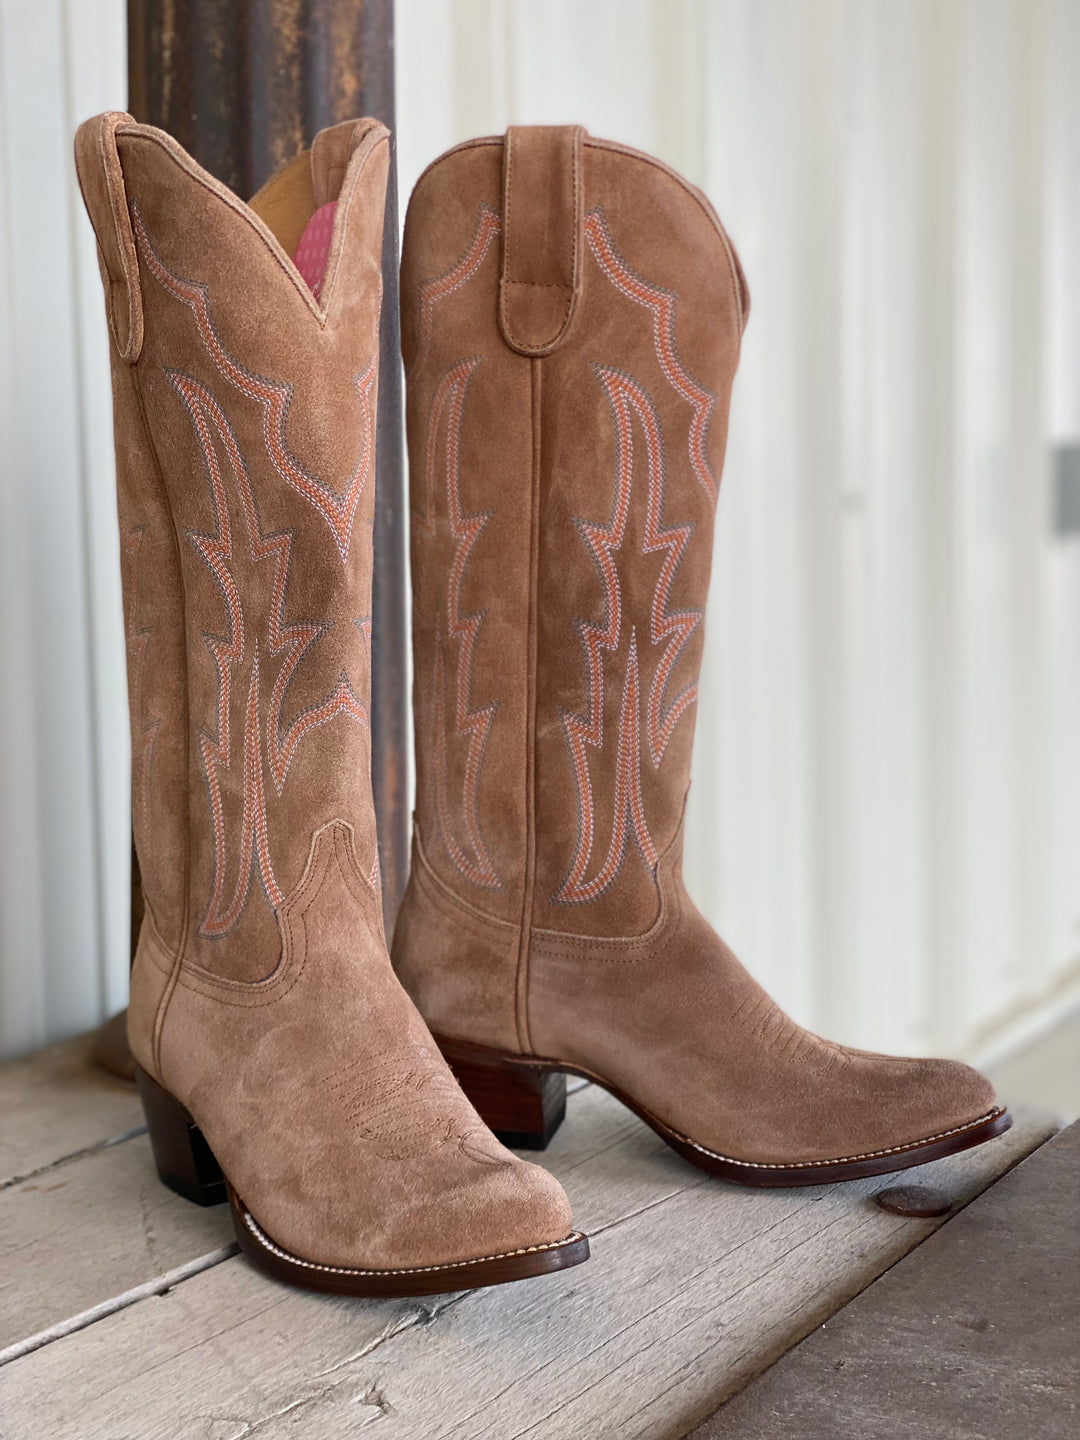 Macie Bean Top Hand | Mind Your Own Biscuits Ladies Boot